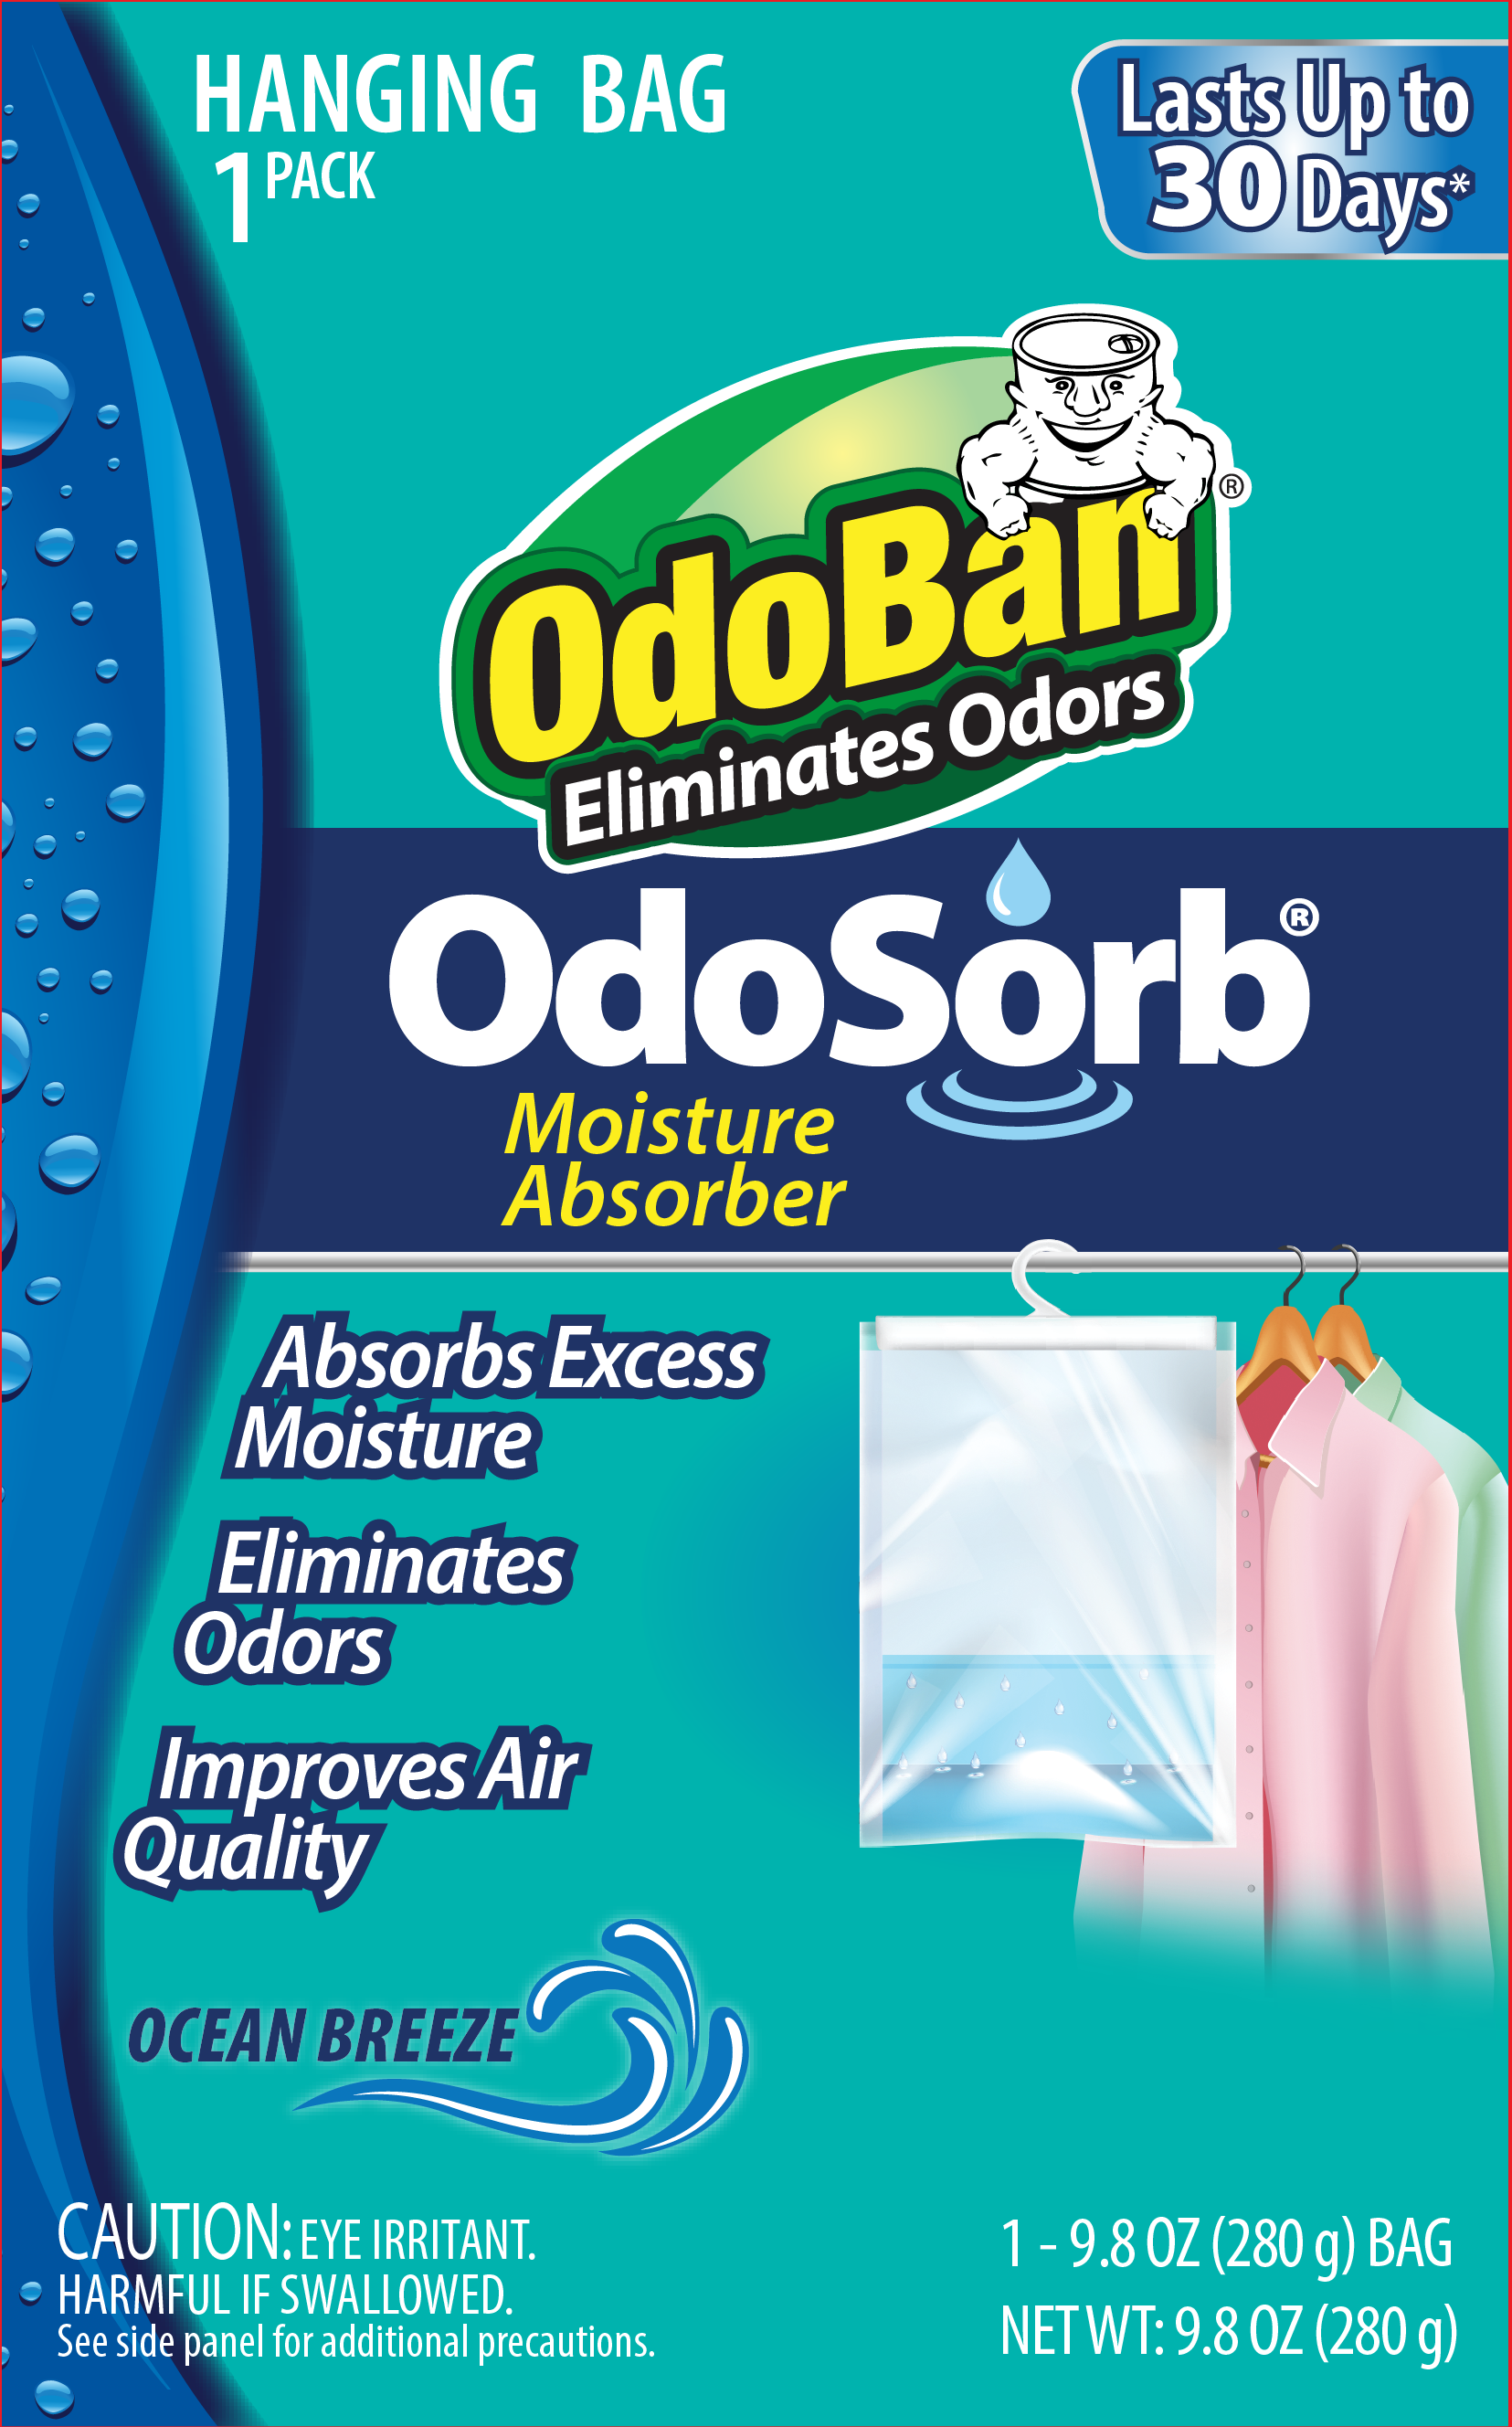 OdoBan® OdoSorb Moisture Absorber Ocean Breeze - OdoBan® - Odor Eliminator  - Air Freshener - Disinfectant - Sanitizer - Fabric and Laundry Freshener -  All-in-One - The Original by Clean Control